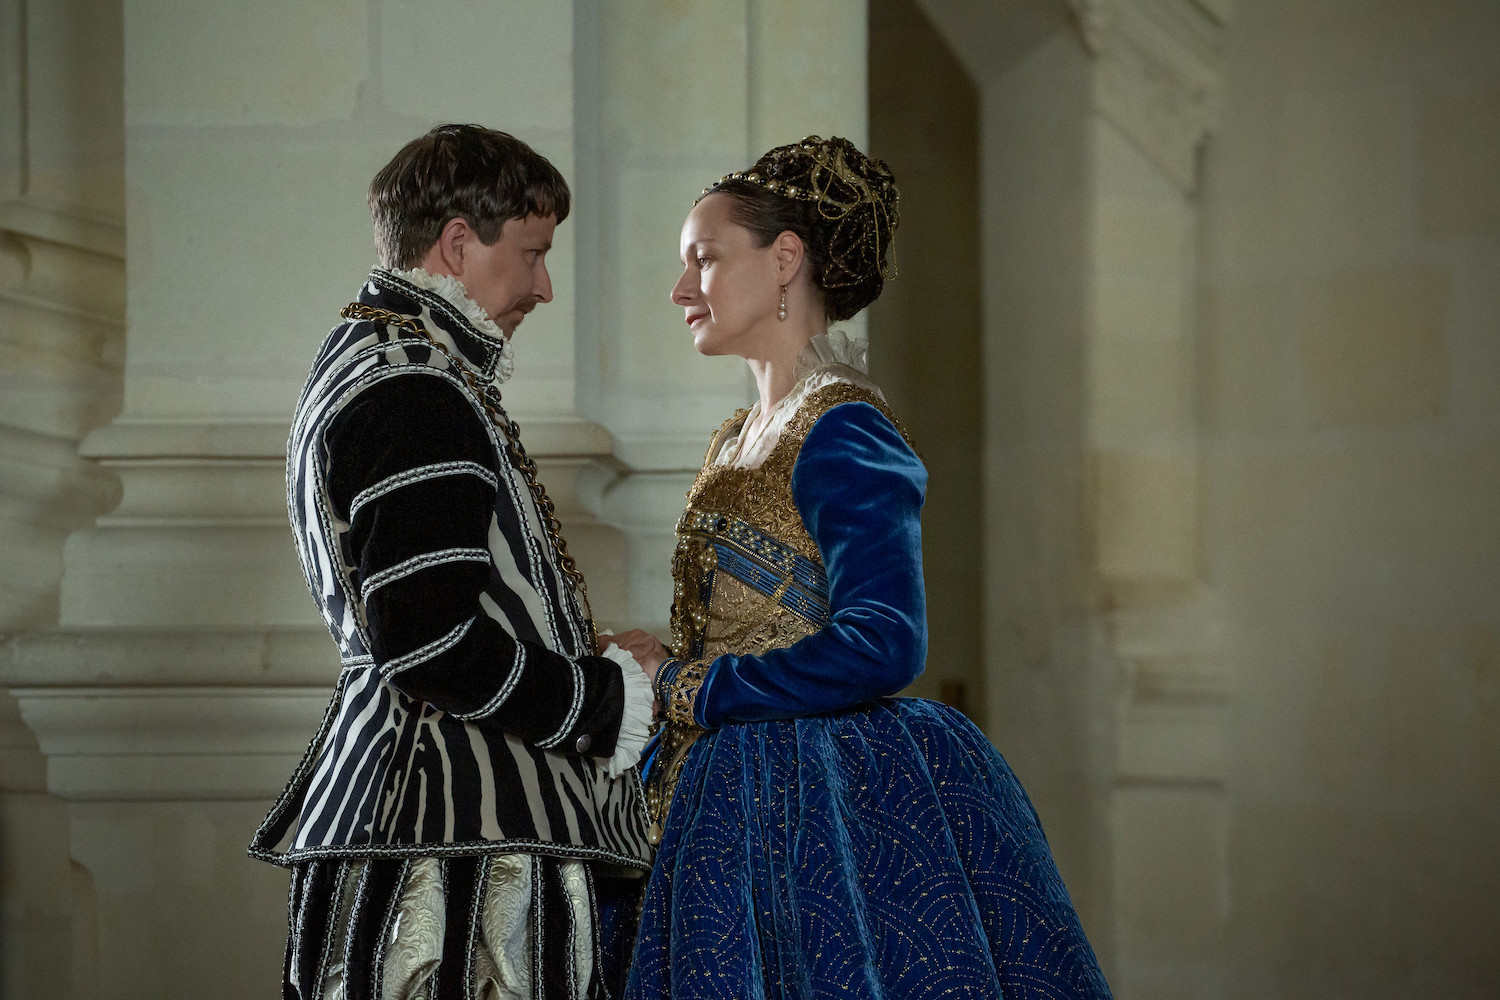 Picture shows: The new King (Lee Ingleby), handsome in black and white, and his Queen (Samantha Morton) in royal blue.